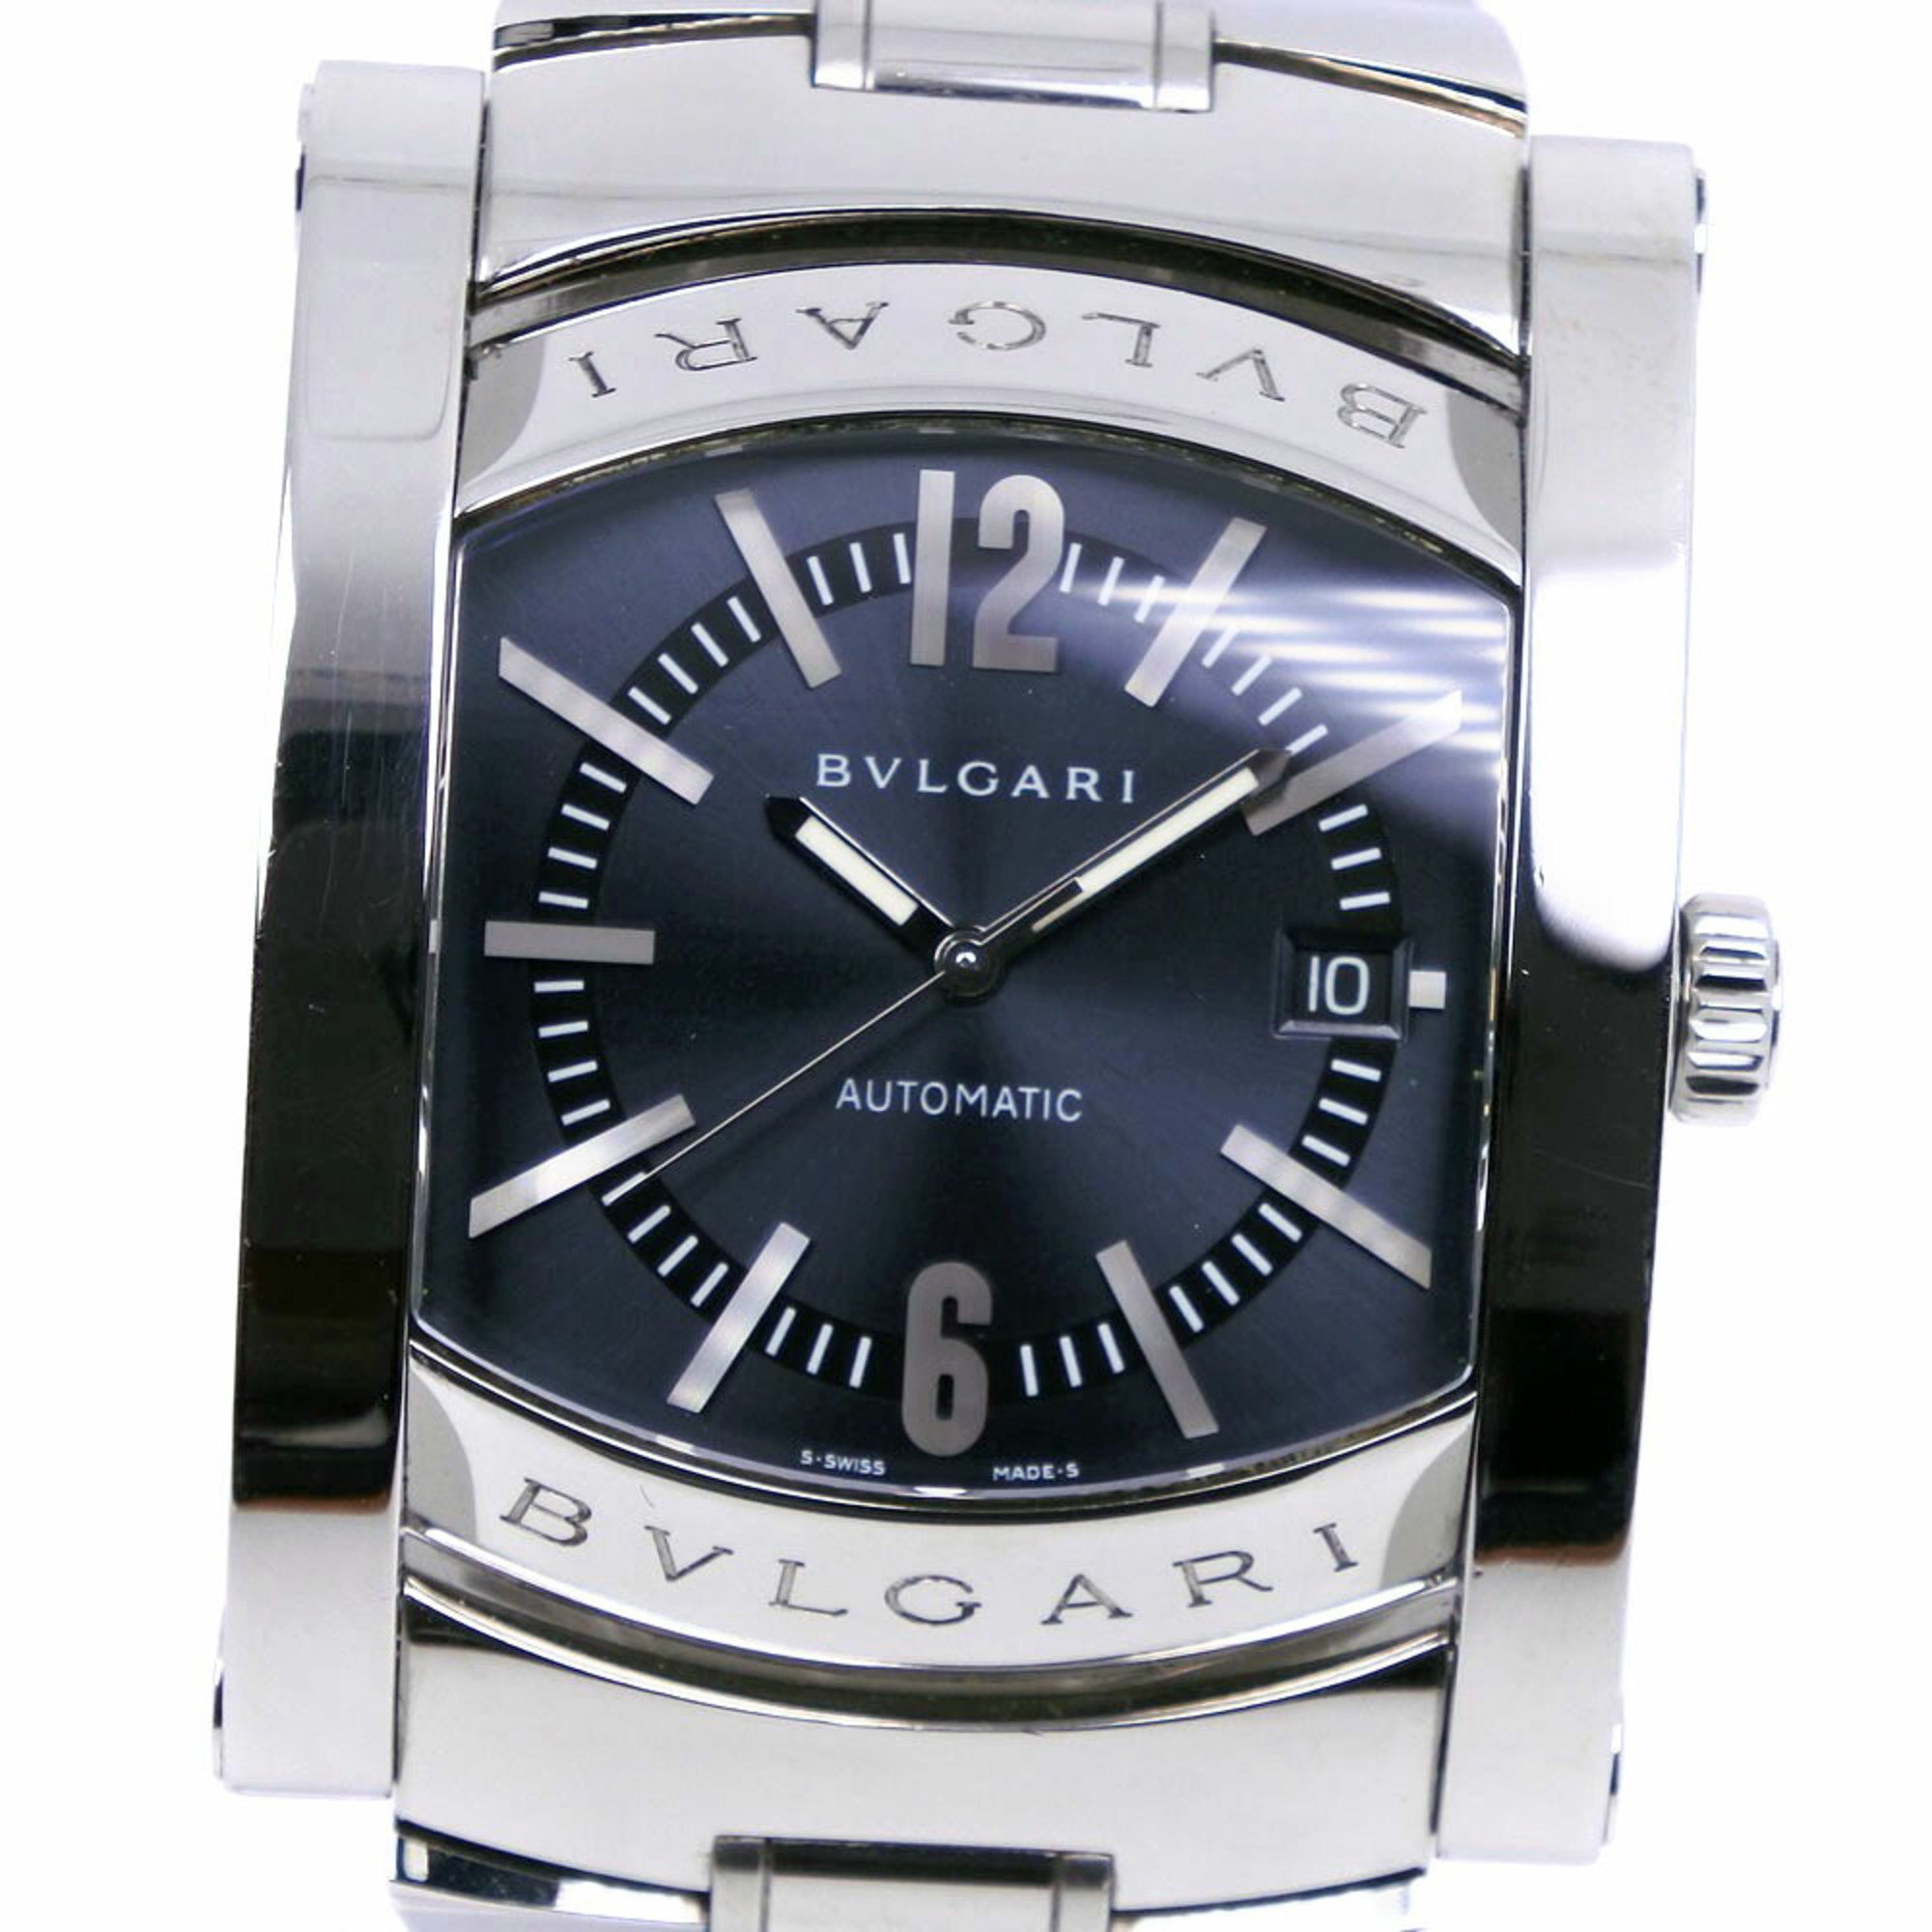 Bvlgari Ashoma Watch AA48S Stainless Steel Silver Automatic Men's Navy Dial